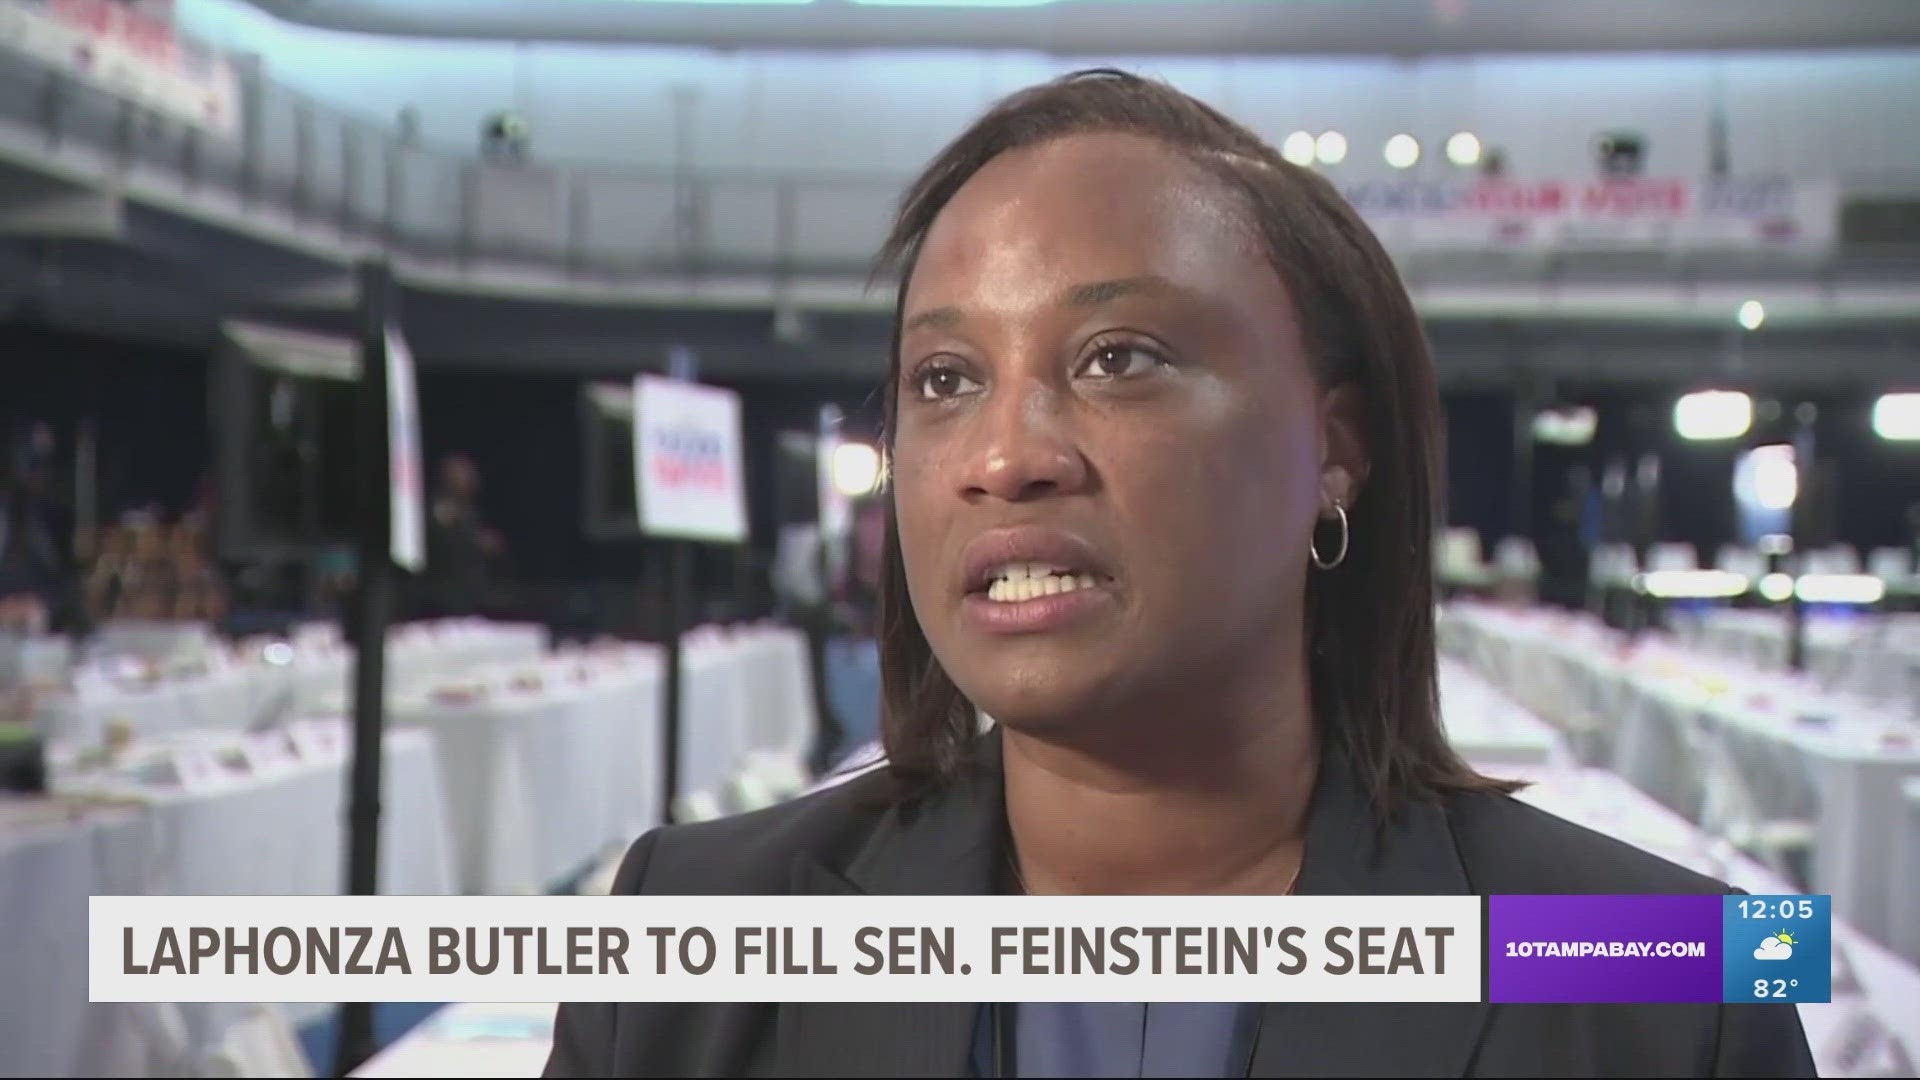 Butler will be the only Black woman serving in the U.S. Senate and the first openly LGBTQ+ person to represent California in the chamber.